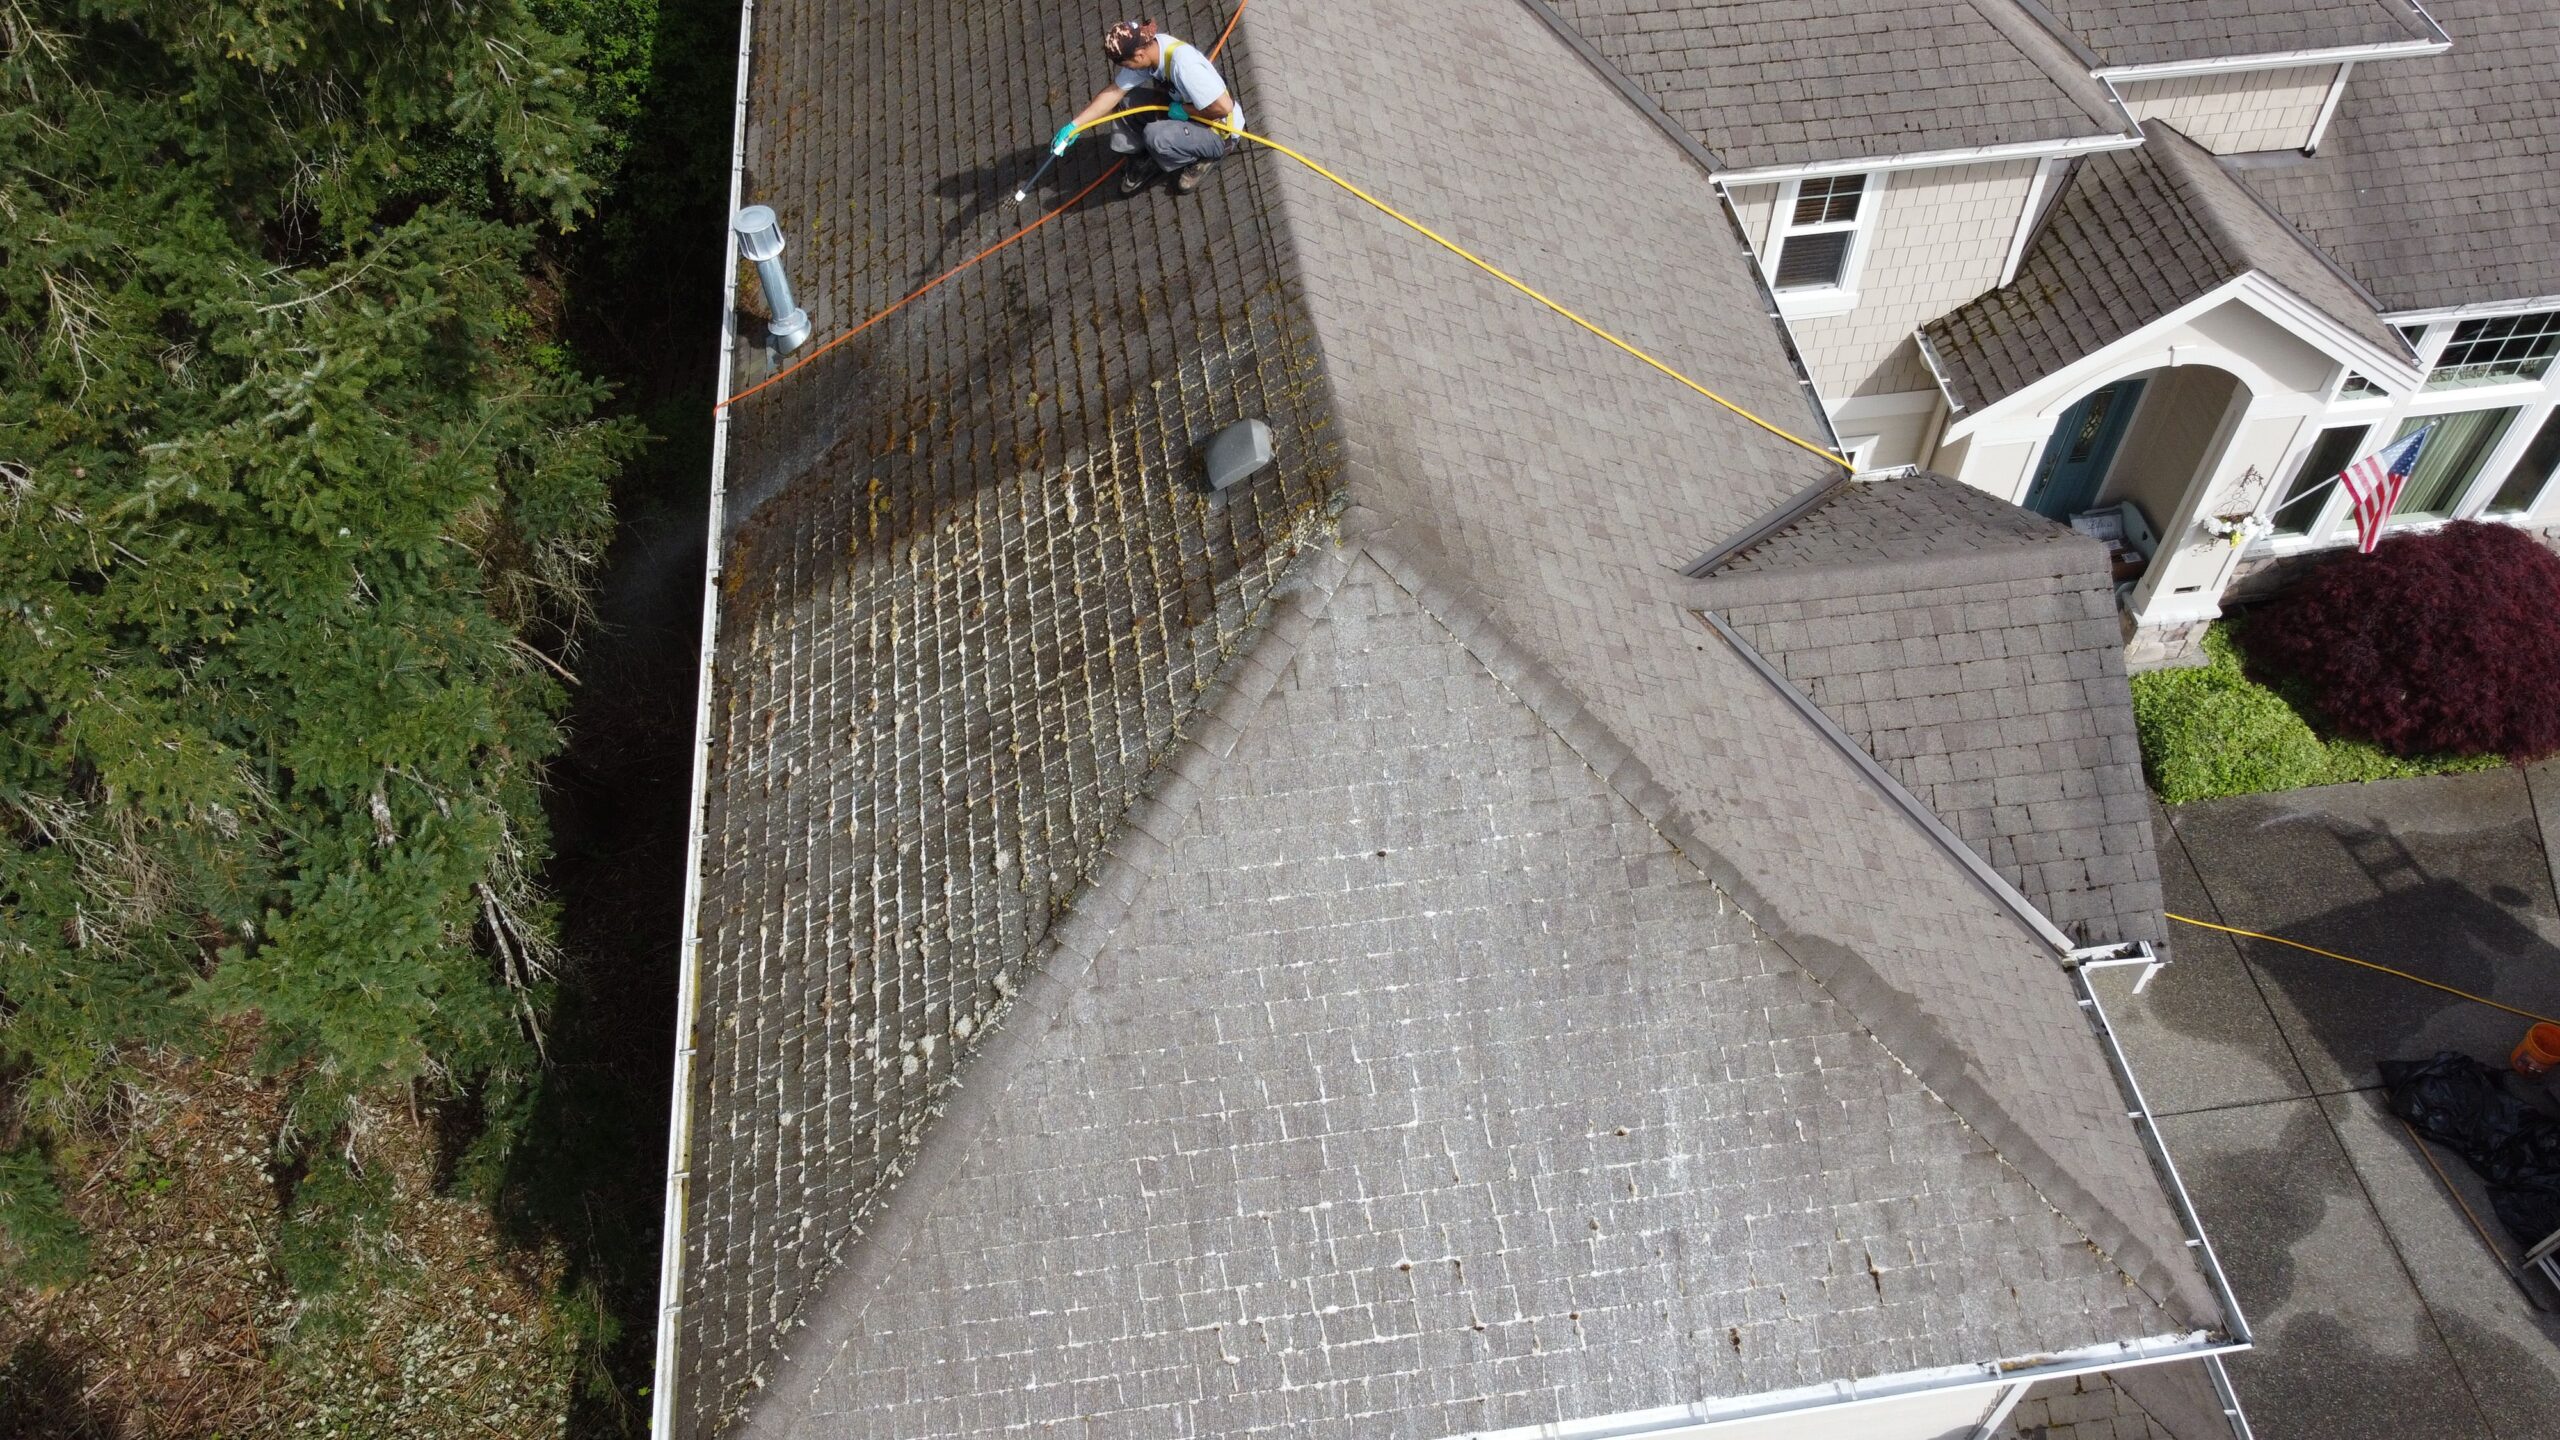 A worker from Chinook Services applies a soft wash solution to instantly kill 100% of the moss. Chinook Services near Seattle WA is top rated and local provider.